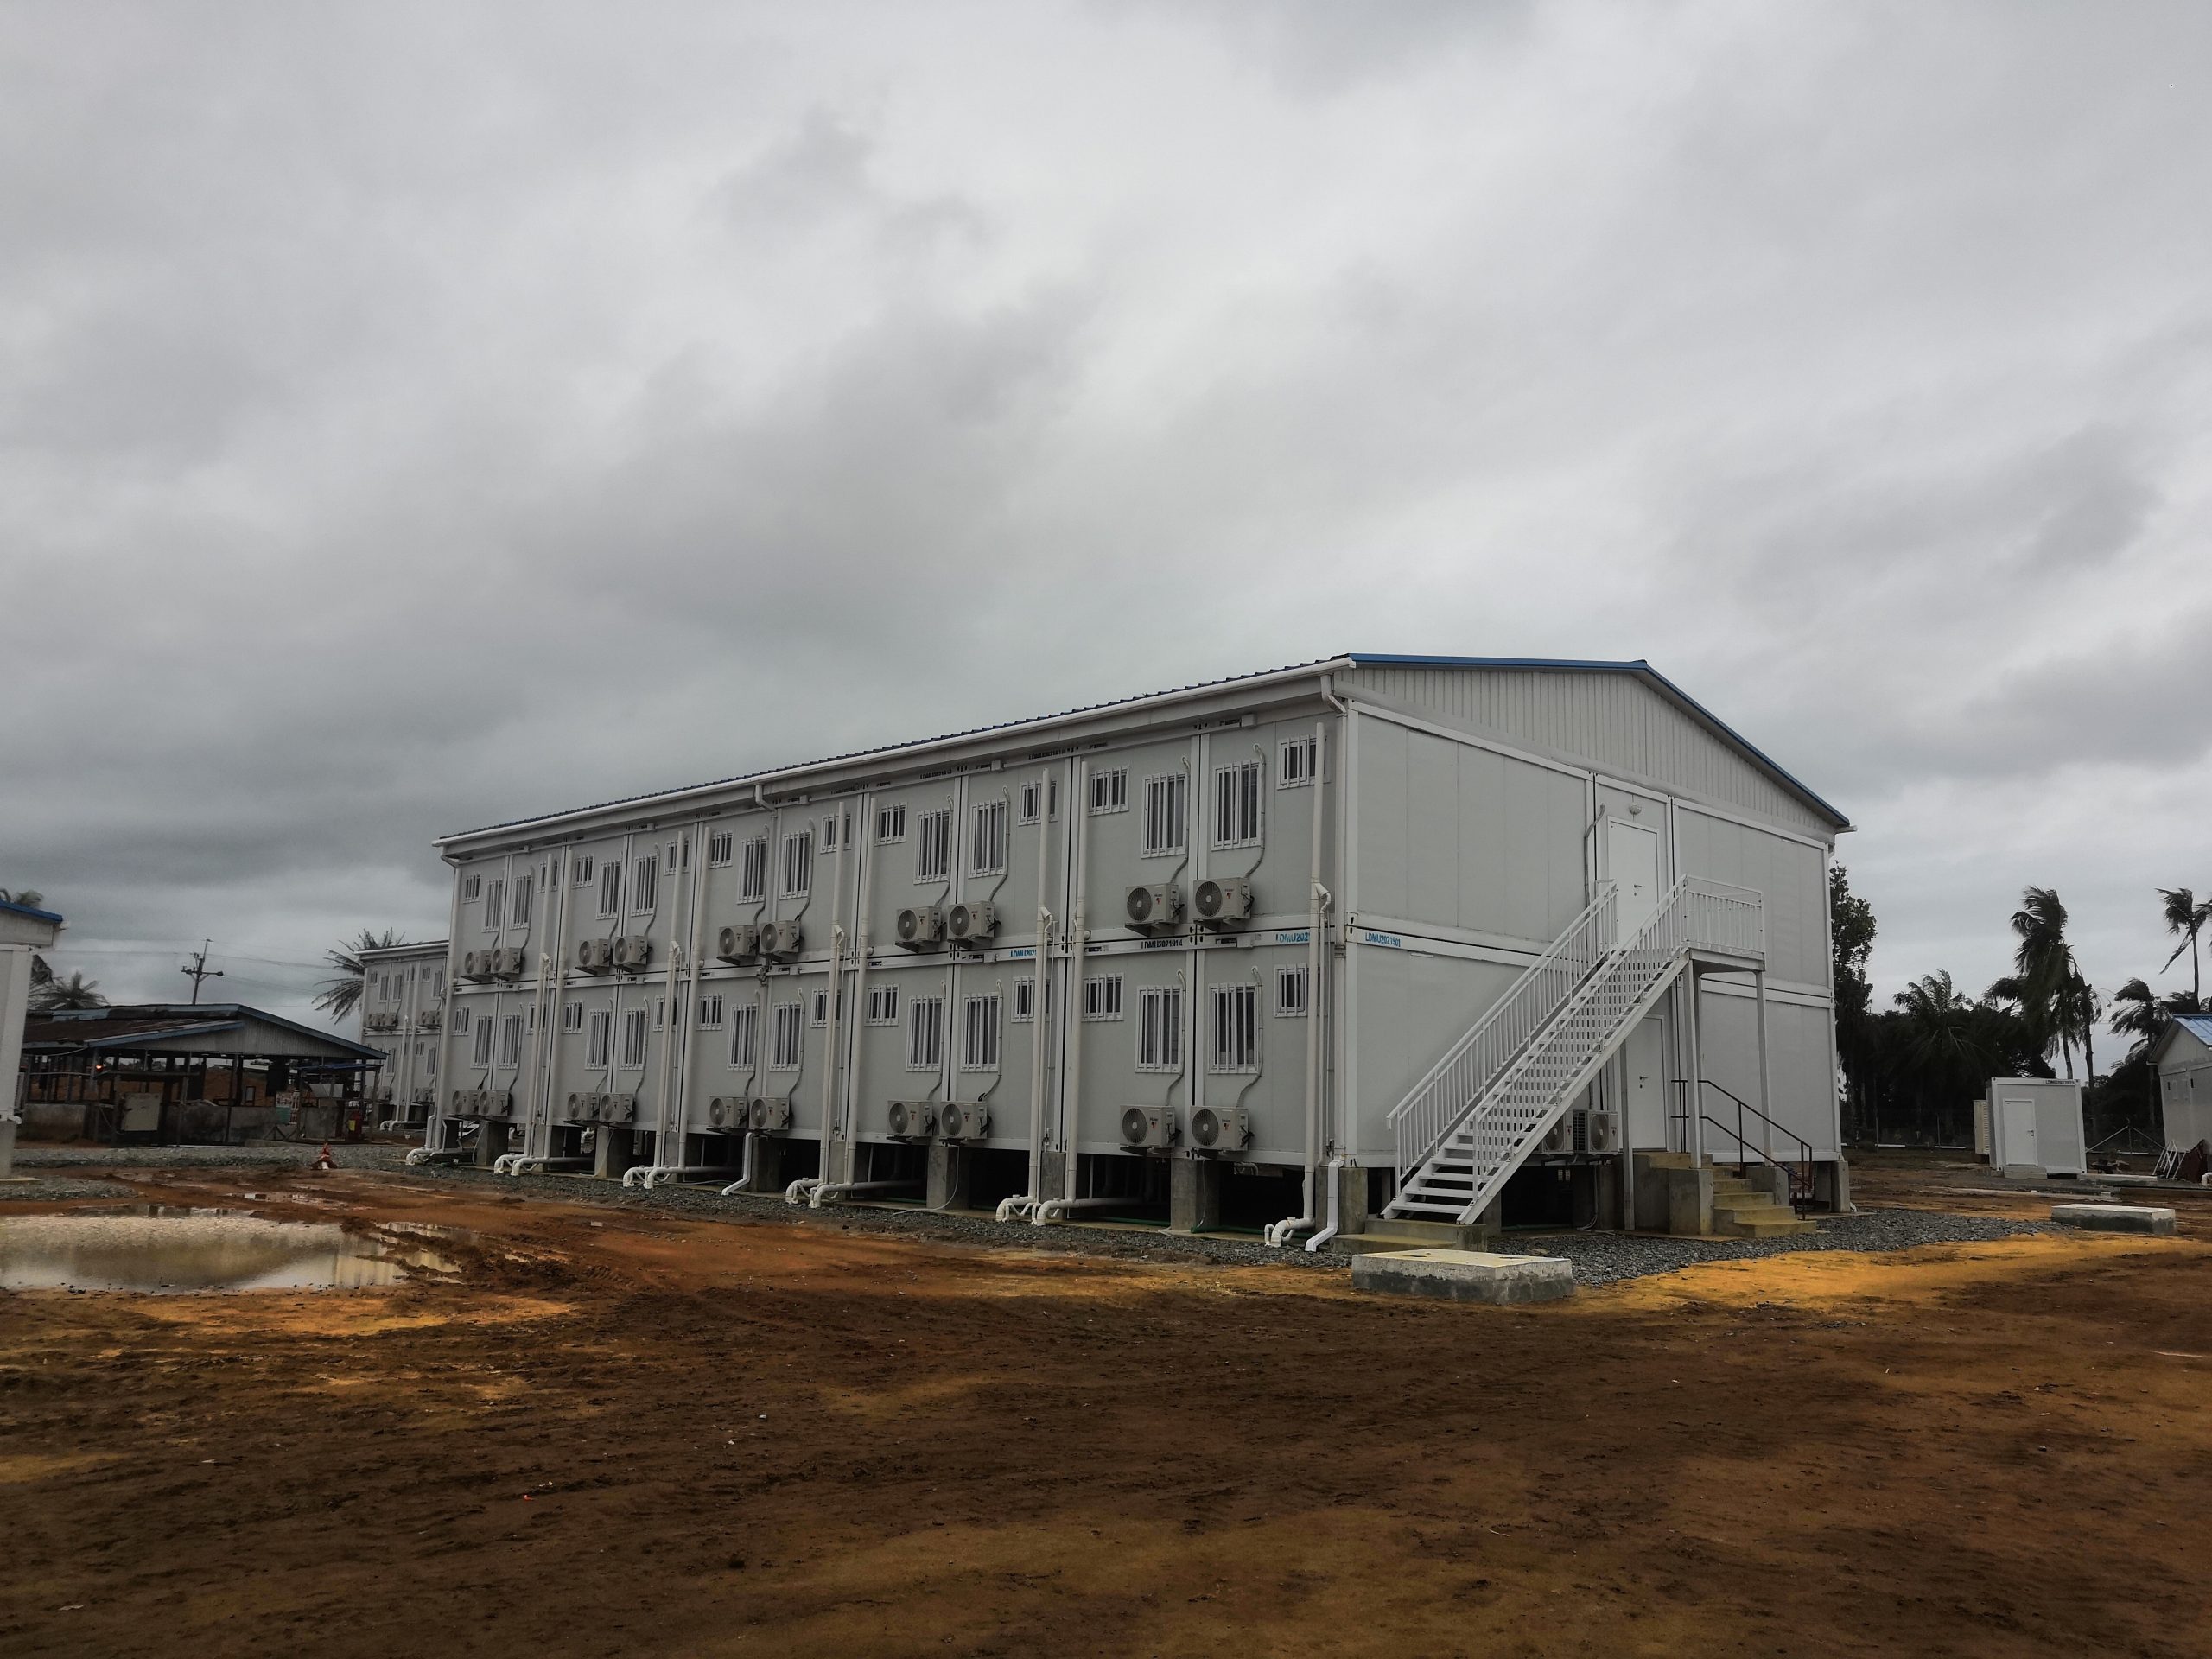 Container City' project embracing adaptable design and reusable modular building approach pioneered by Lida Group looks to transform concept of worker camps as long-term affordable communities